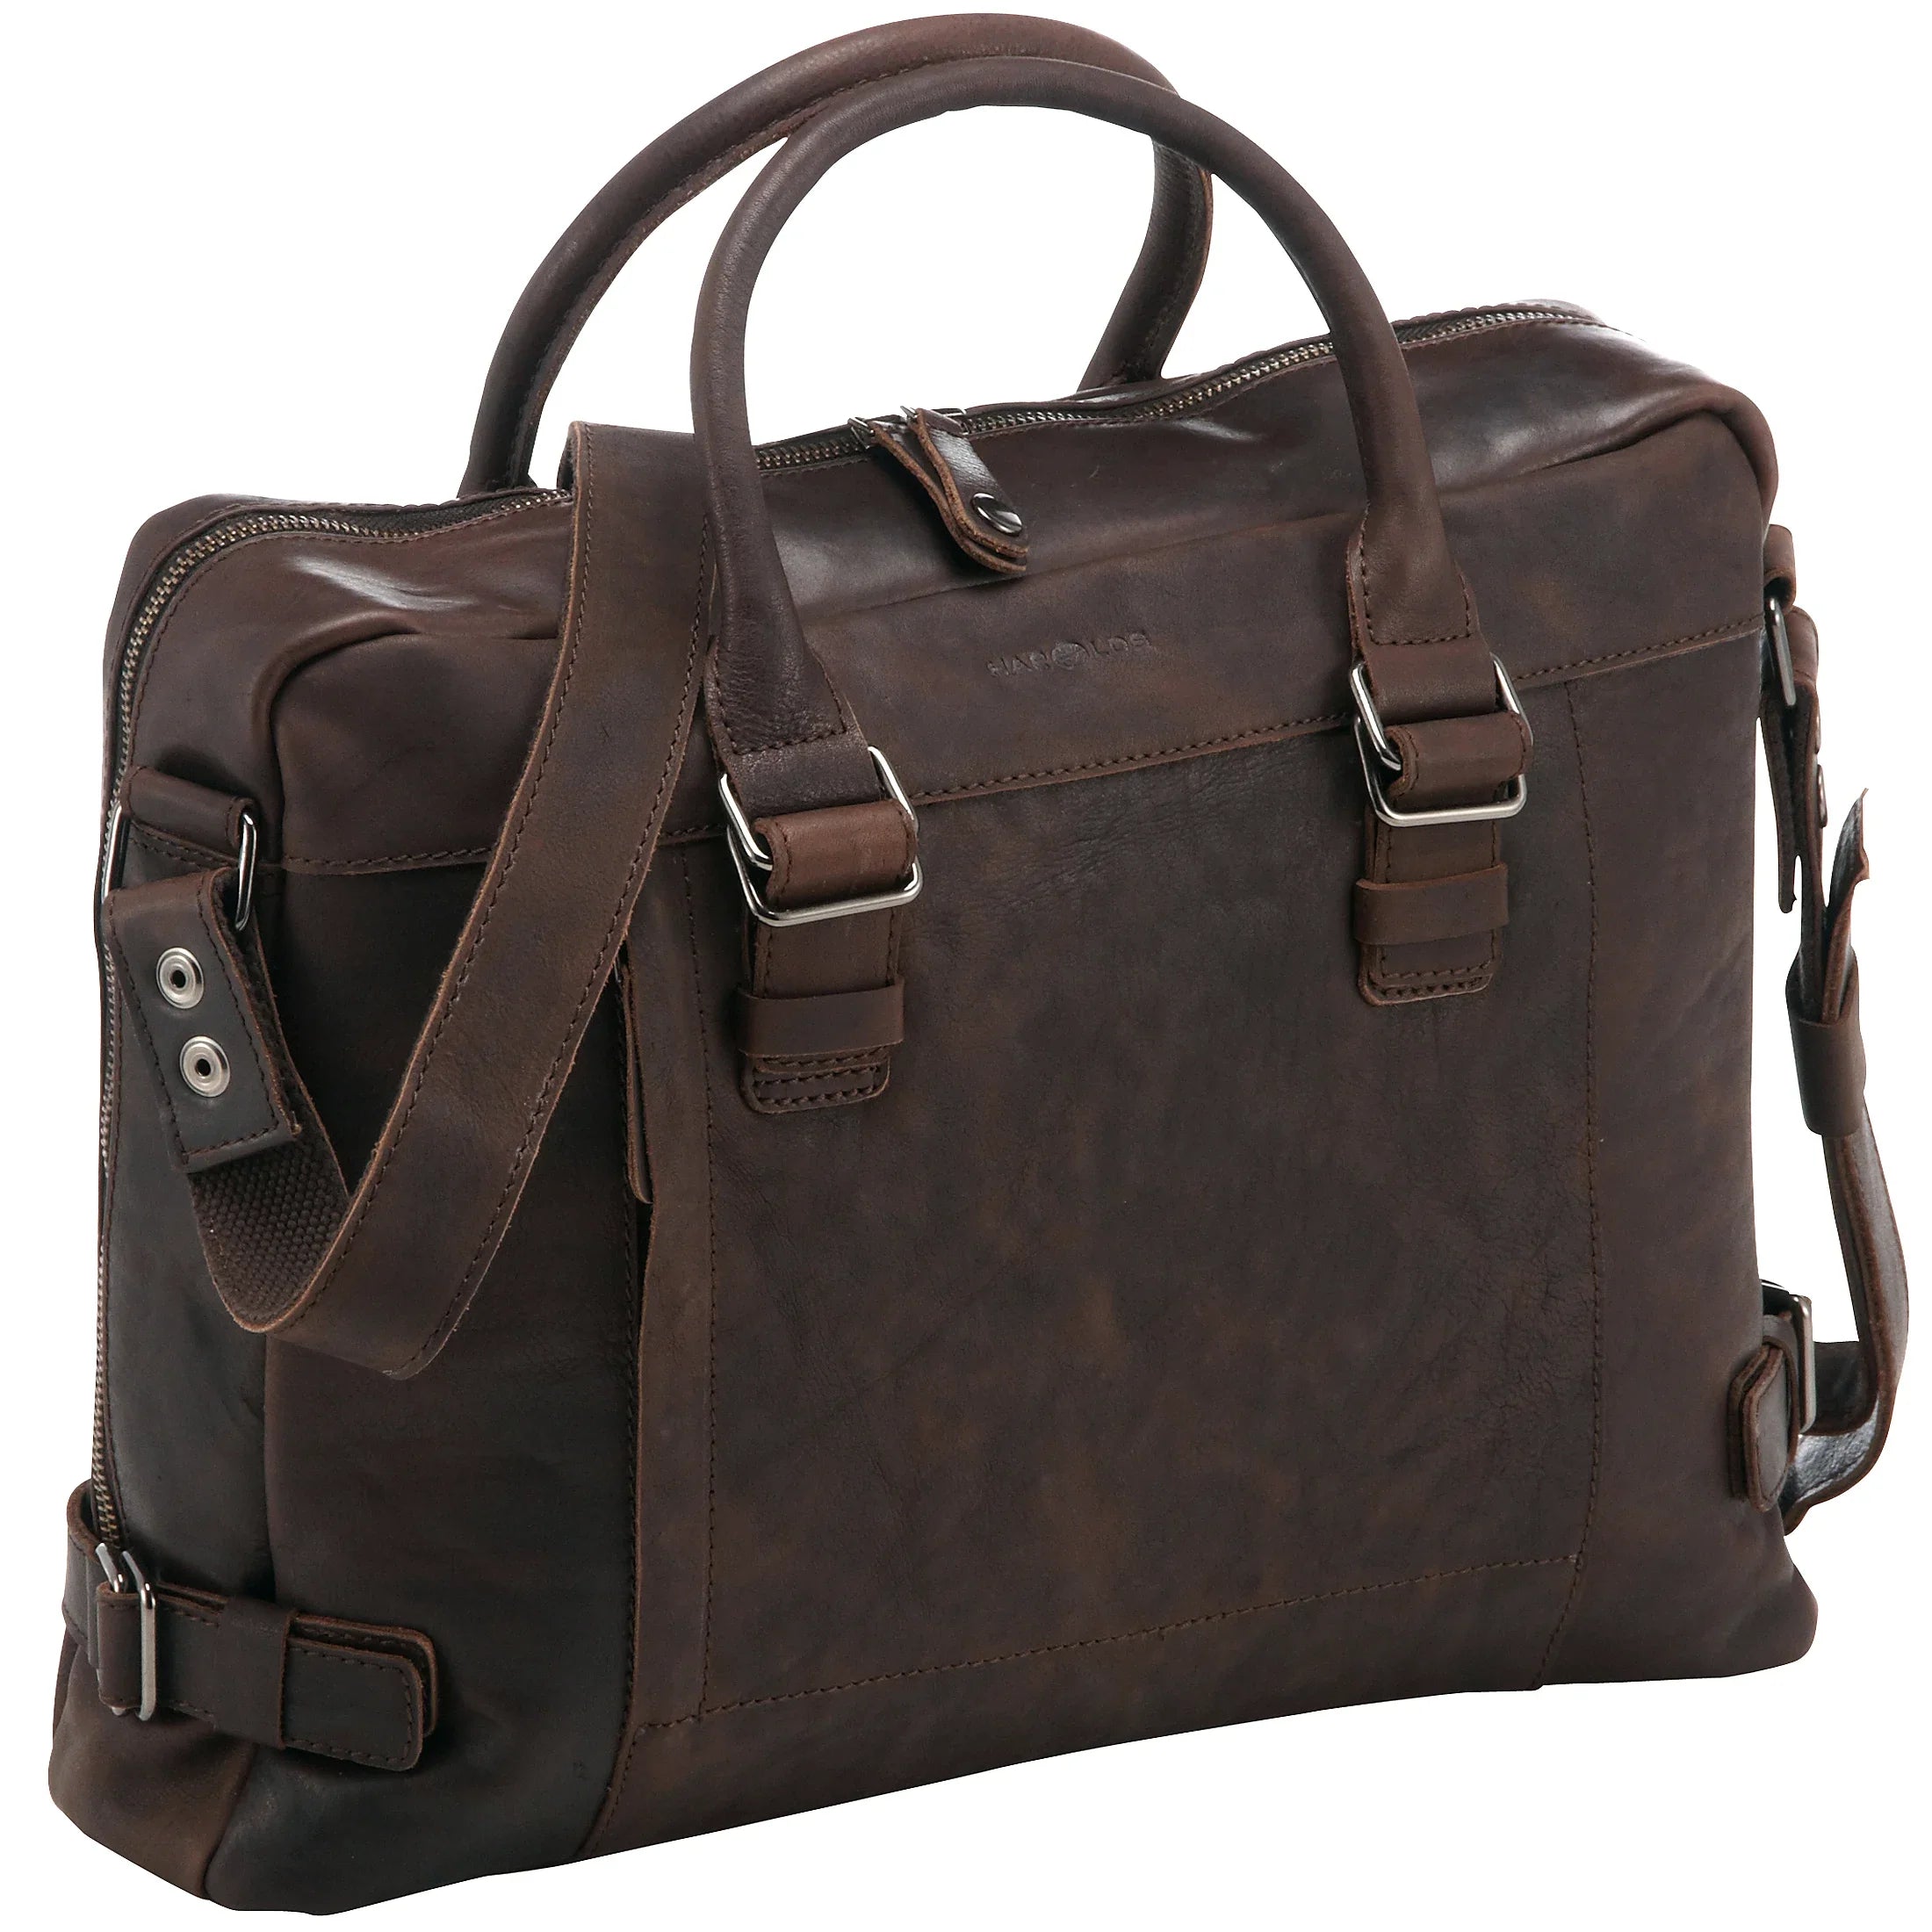 Harolds R. Johnson business bag with leather notebook compartment 40 cm - dark brown